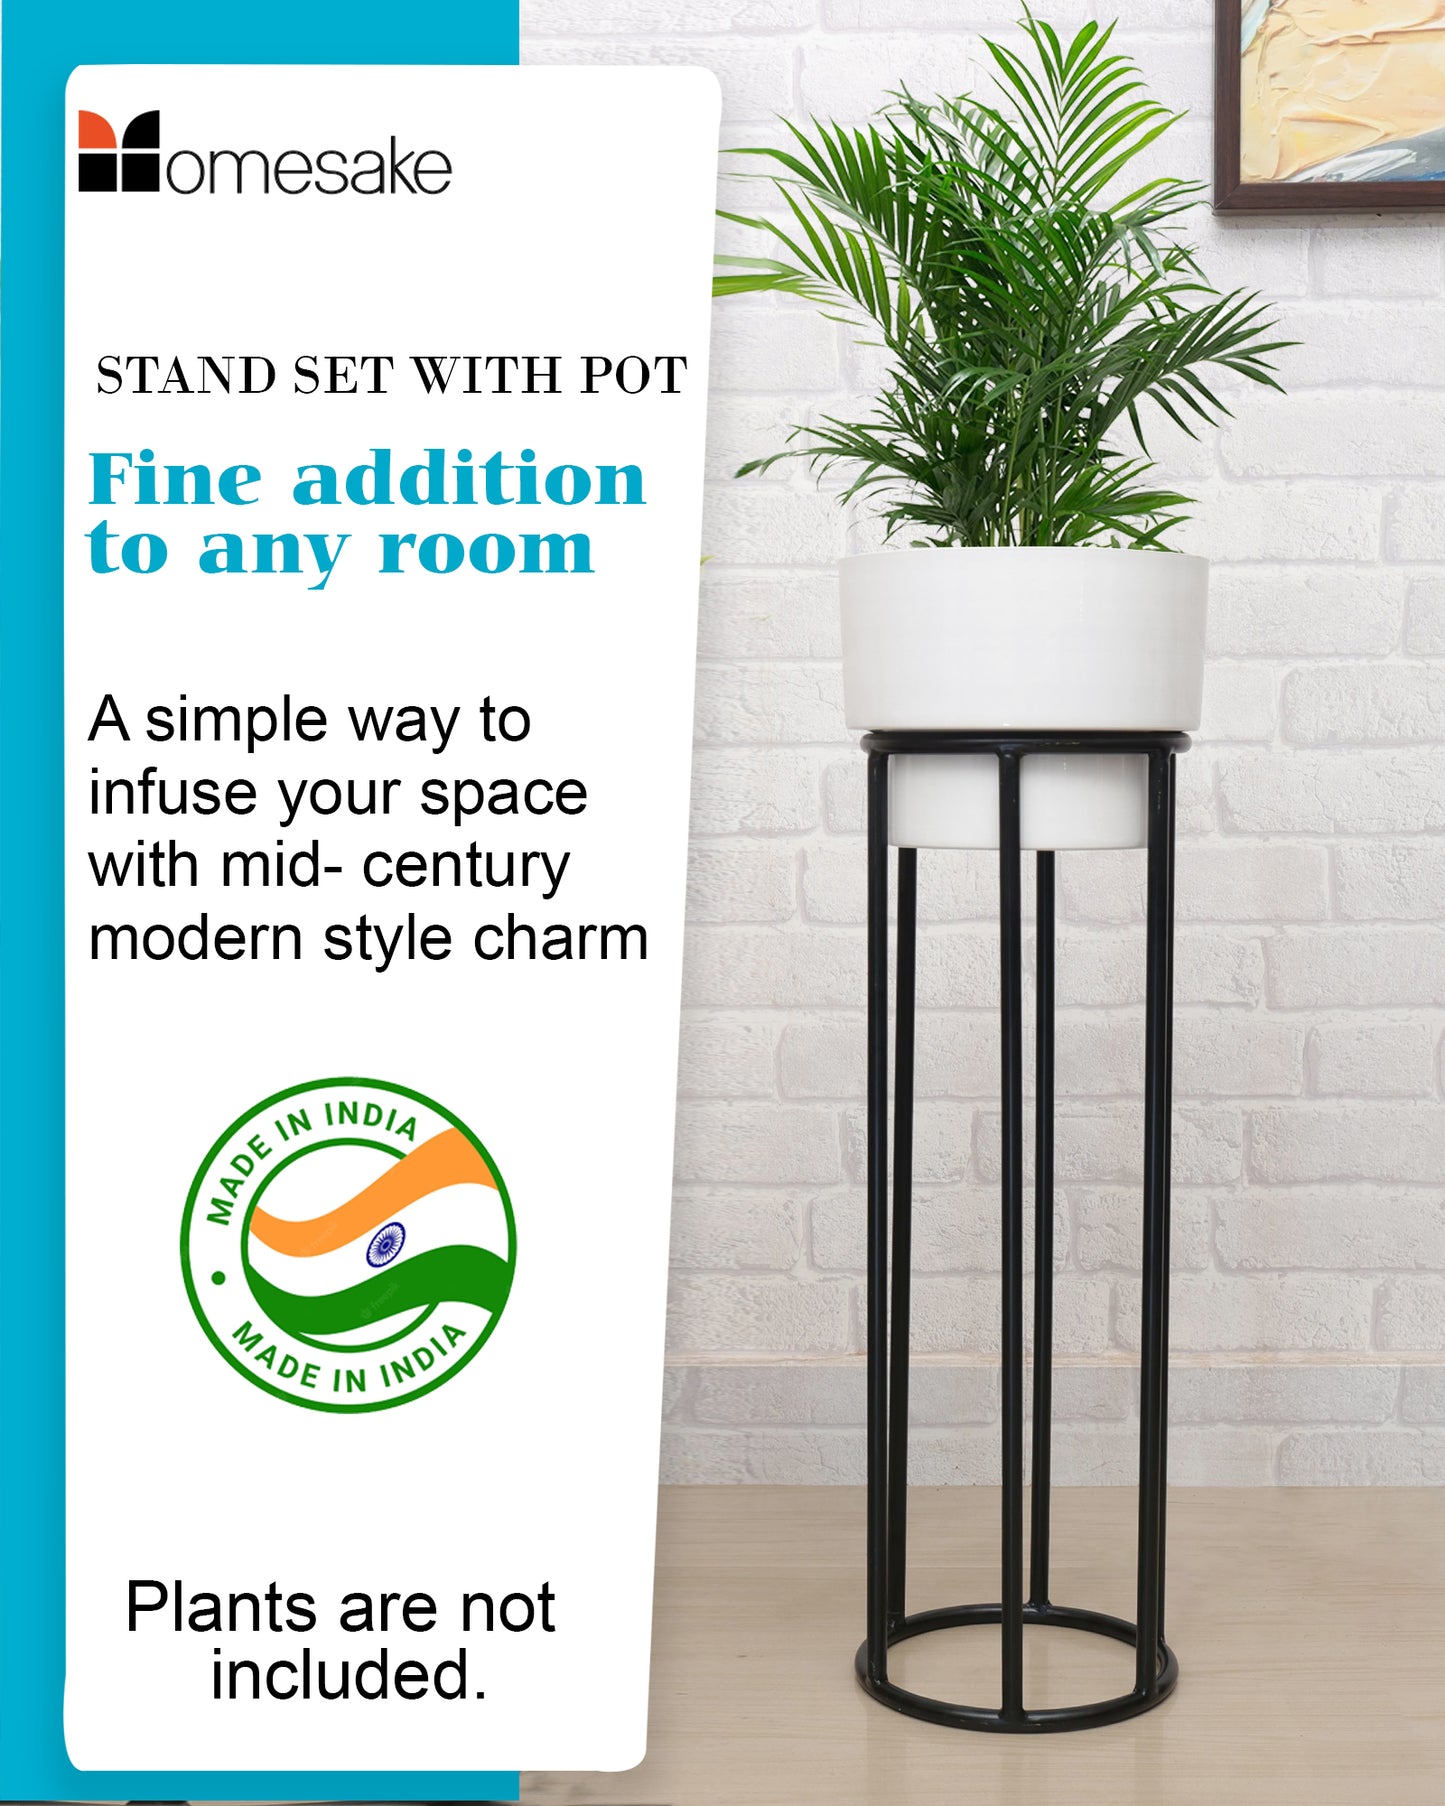 Metal Planters Outdoor & Indoor, Metal Farmhouse Decor for Garden, Patio, Porch & Balcony, Pots with Stand, Front Door Decorative set of 2, Black Round Base